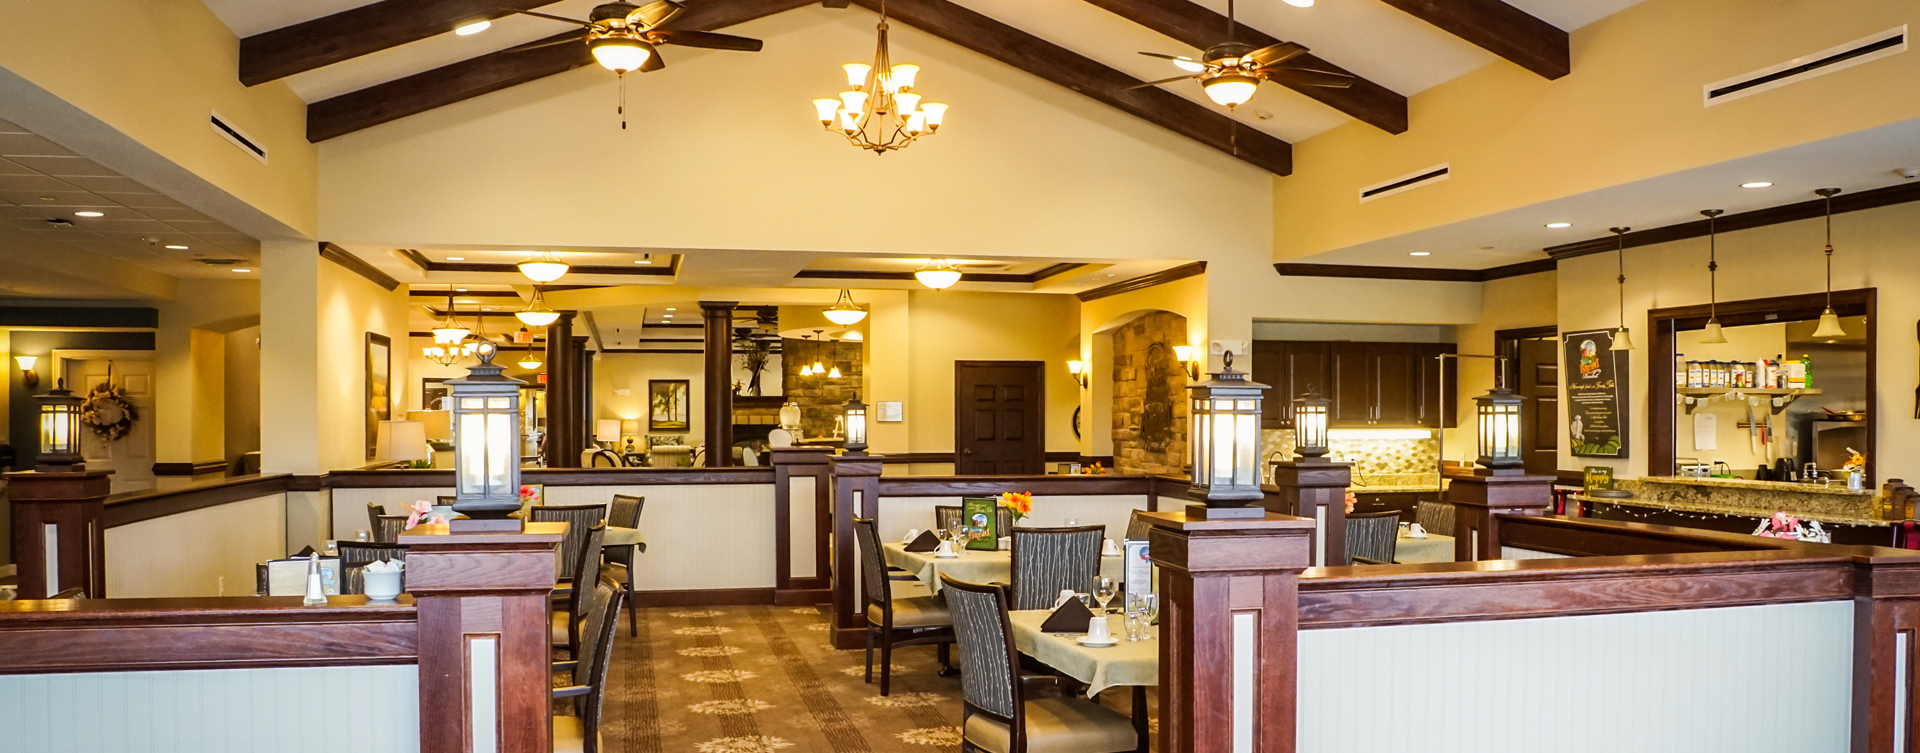 Enjoy restaurant -style meals served three times a day in our dining room at Bickford of Aurora